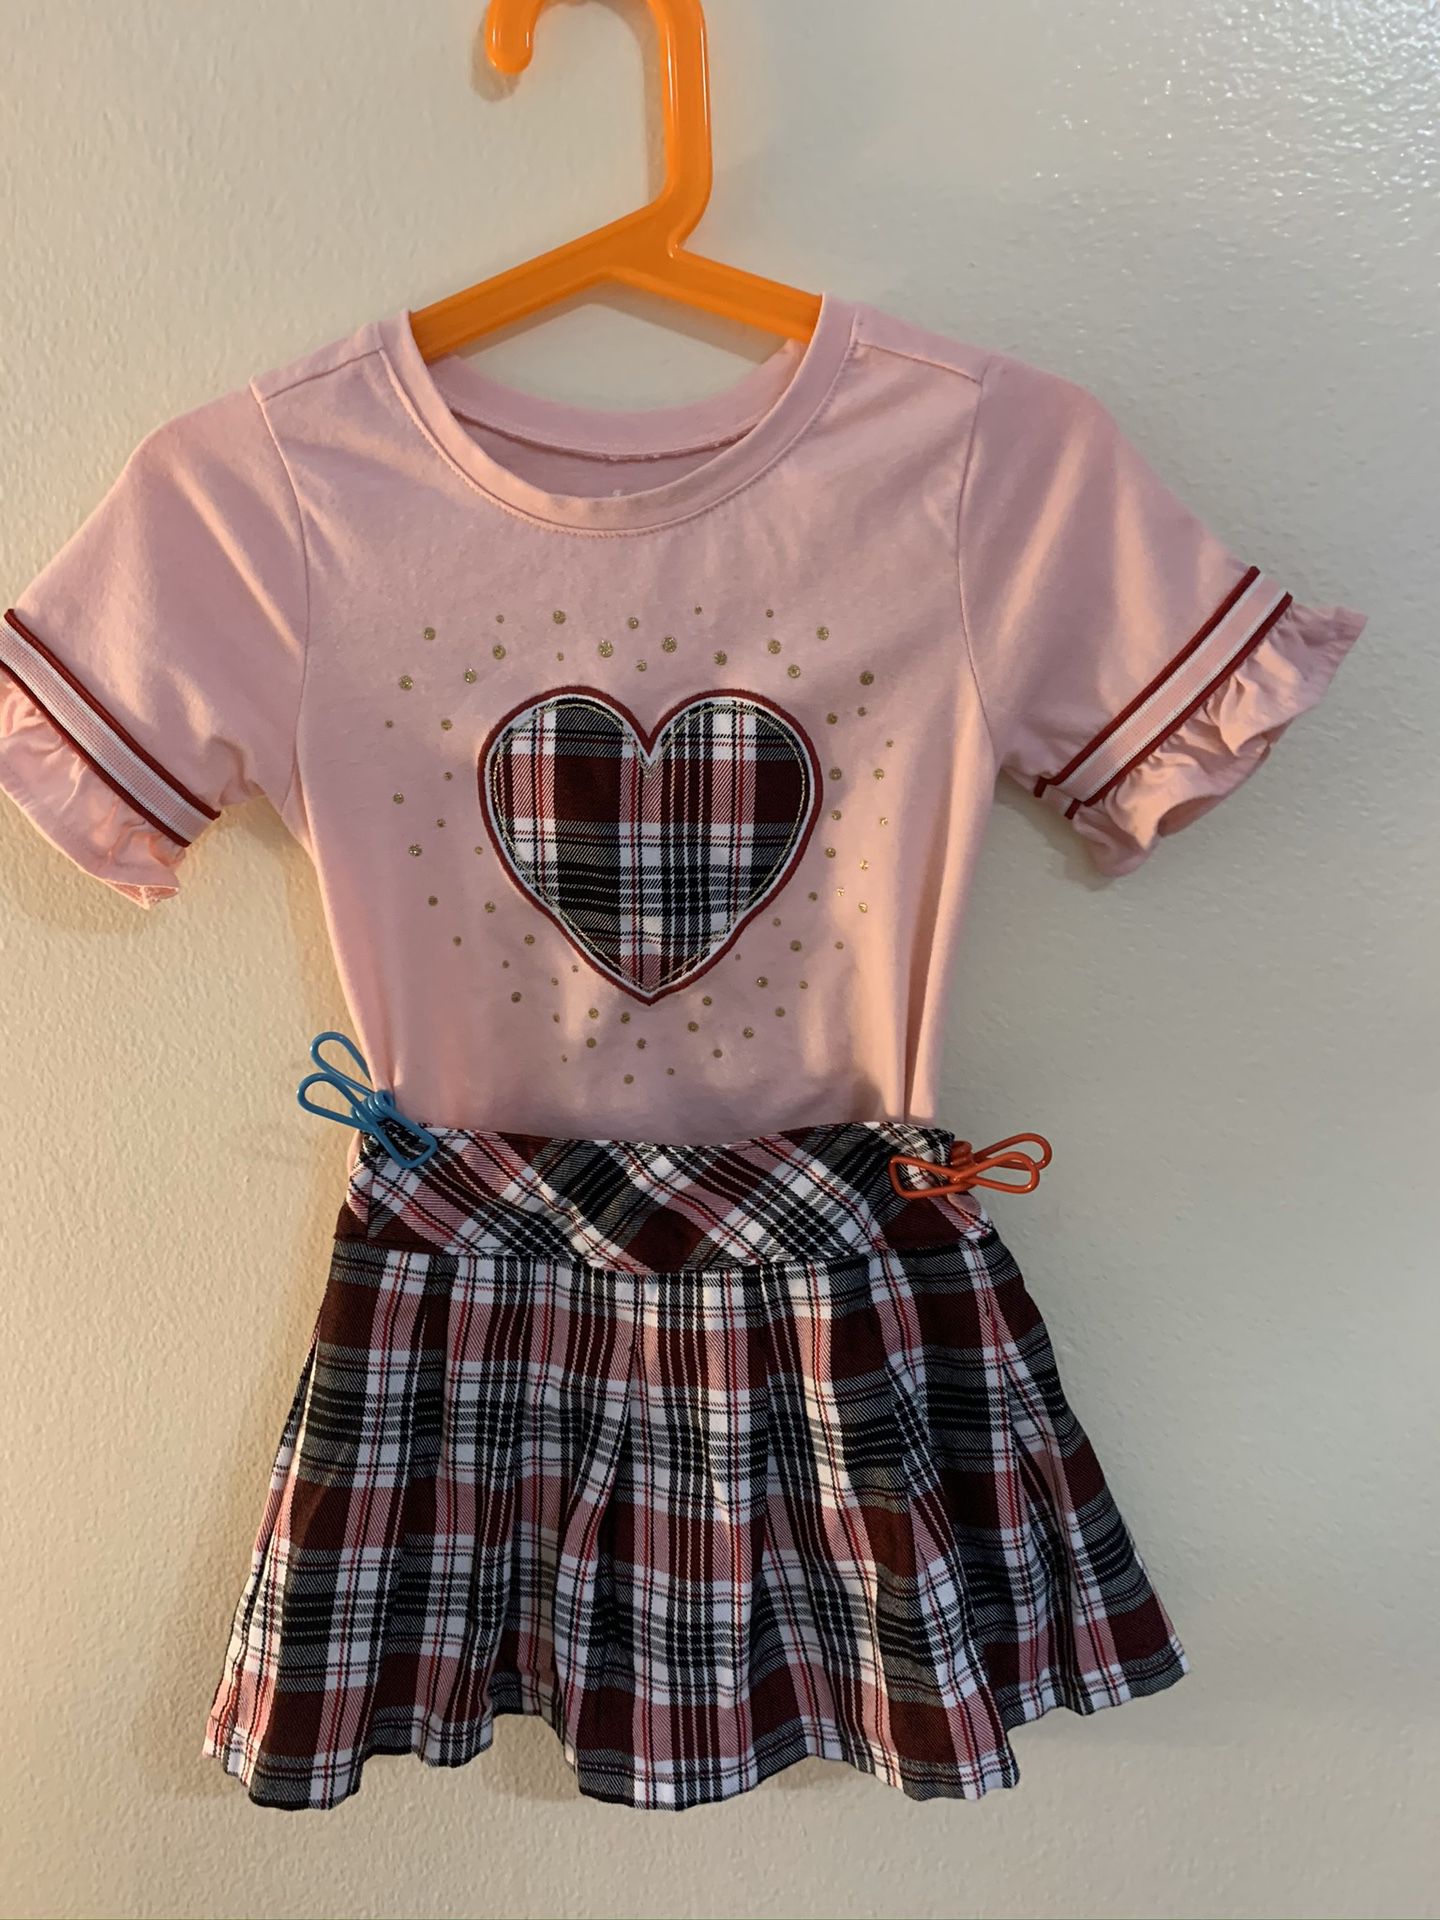 Girls dress outfit size 3T